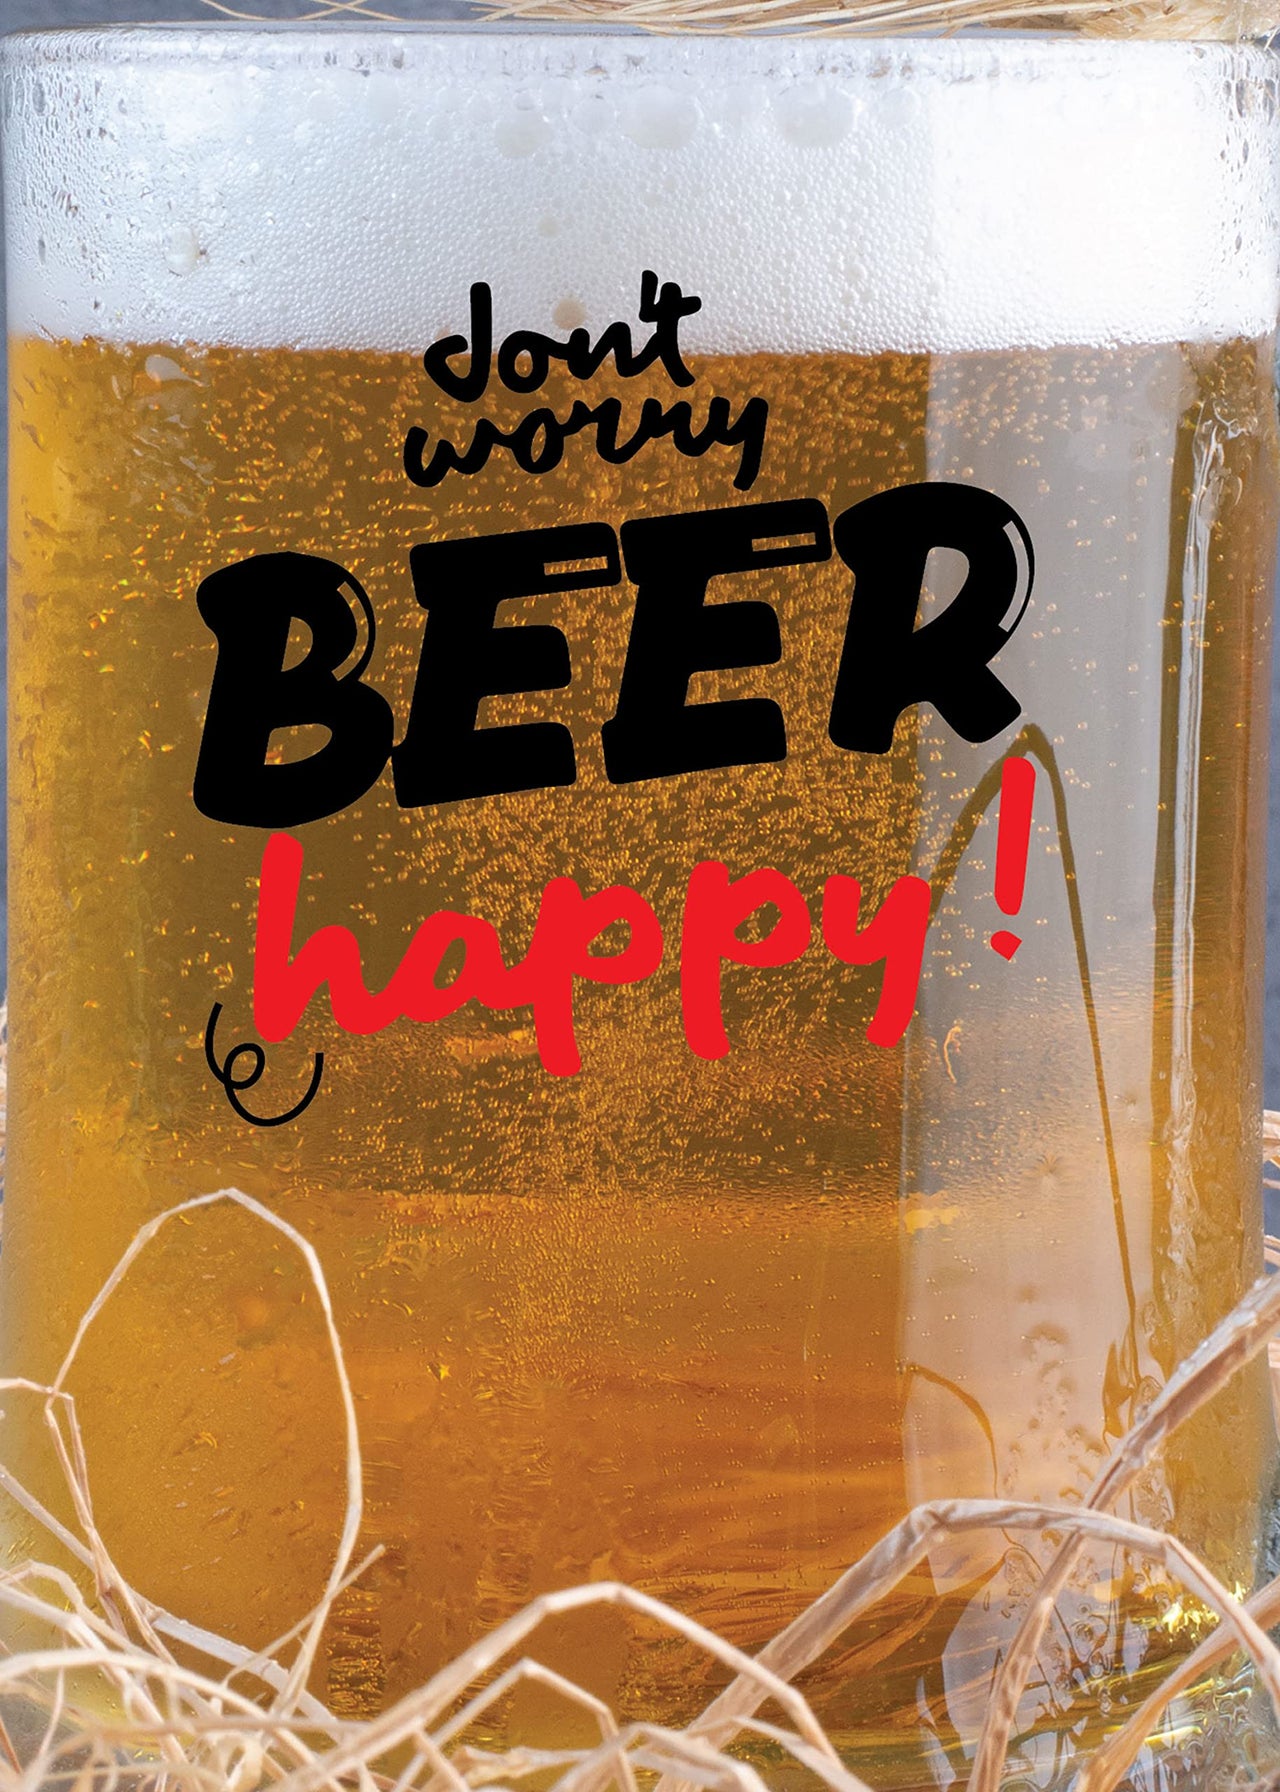 Don’t Worry Beer Happy-Beer Mug -1 Piece, Clear, 500 ml - Transparent Glass Beer Mug-Printed Beer Mug with Handle Gift for Men